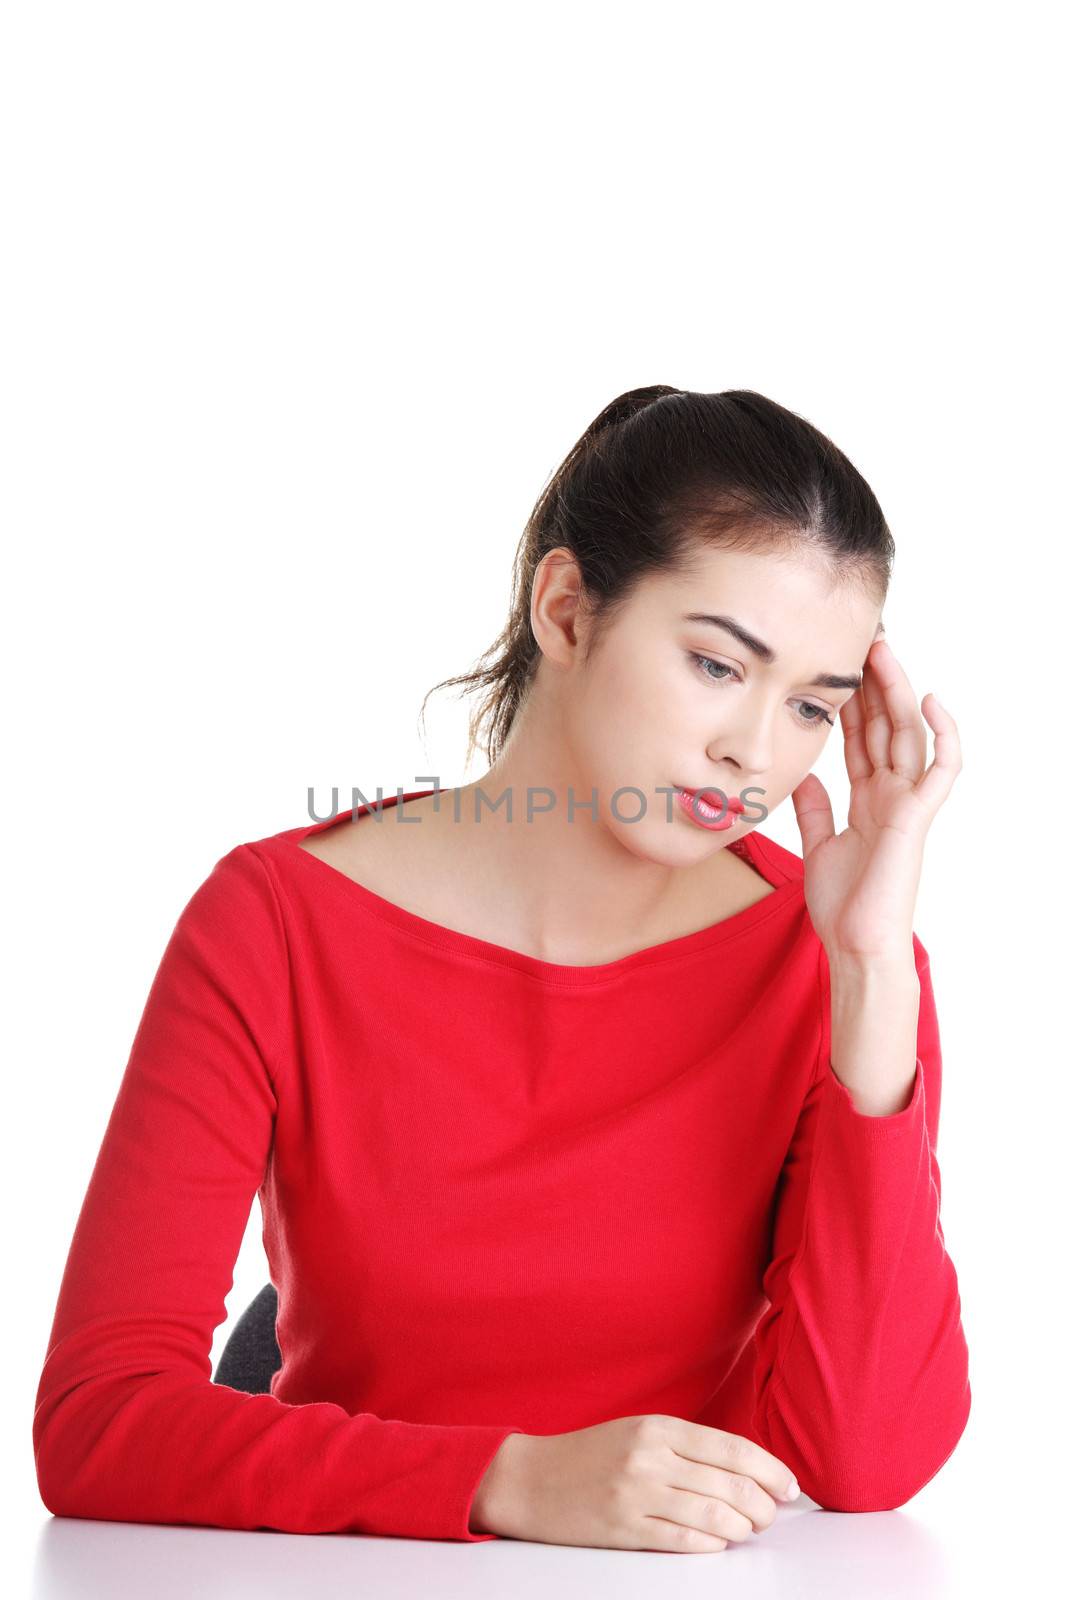 Girl sitting with resigned position. Bored young woman touching her head. Isolated on white background.